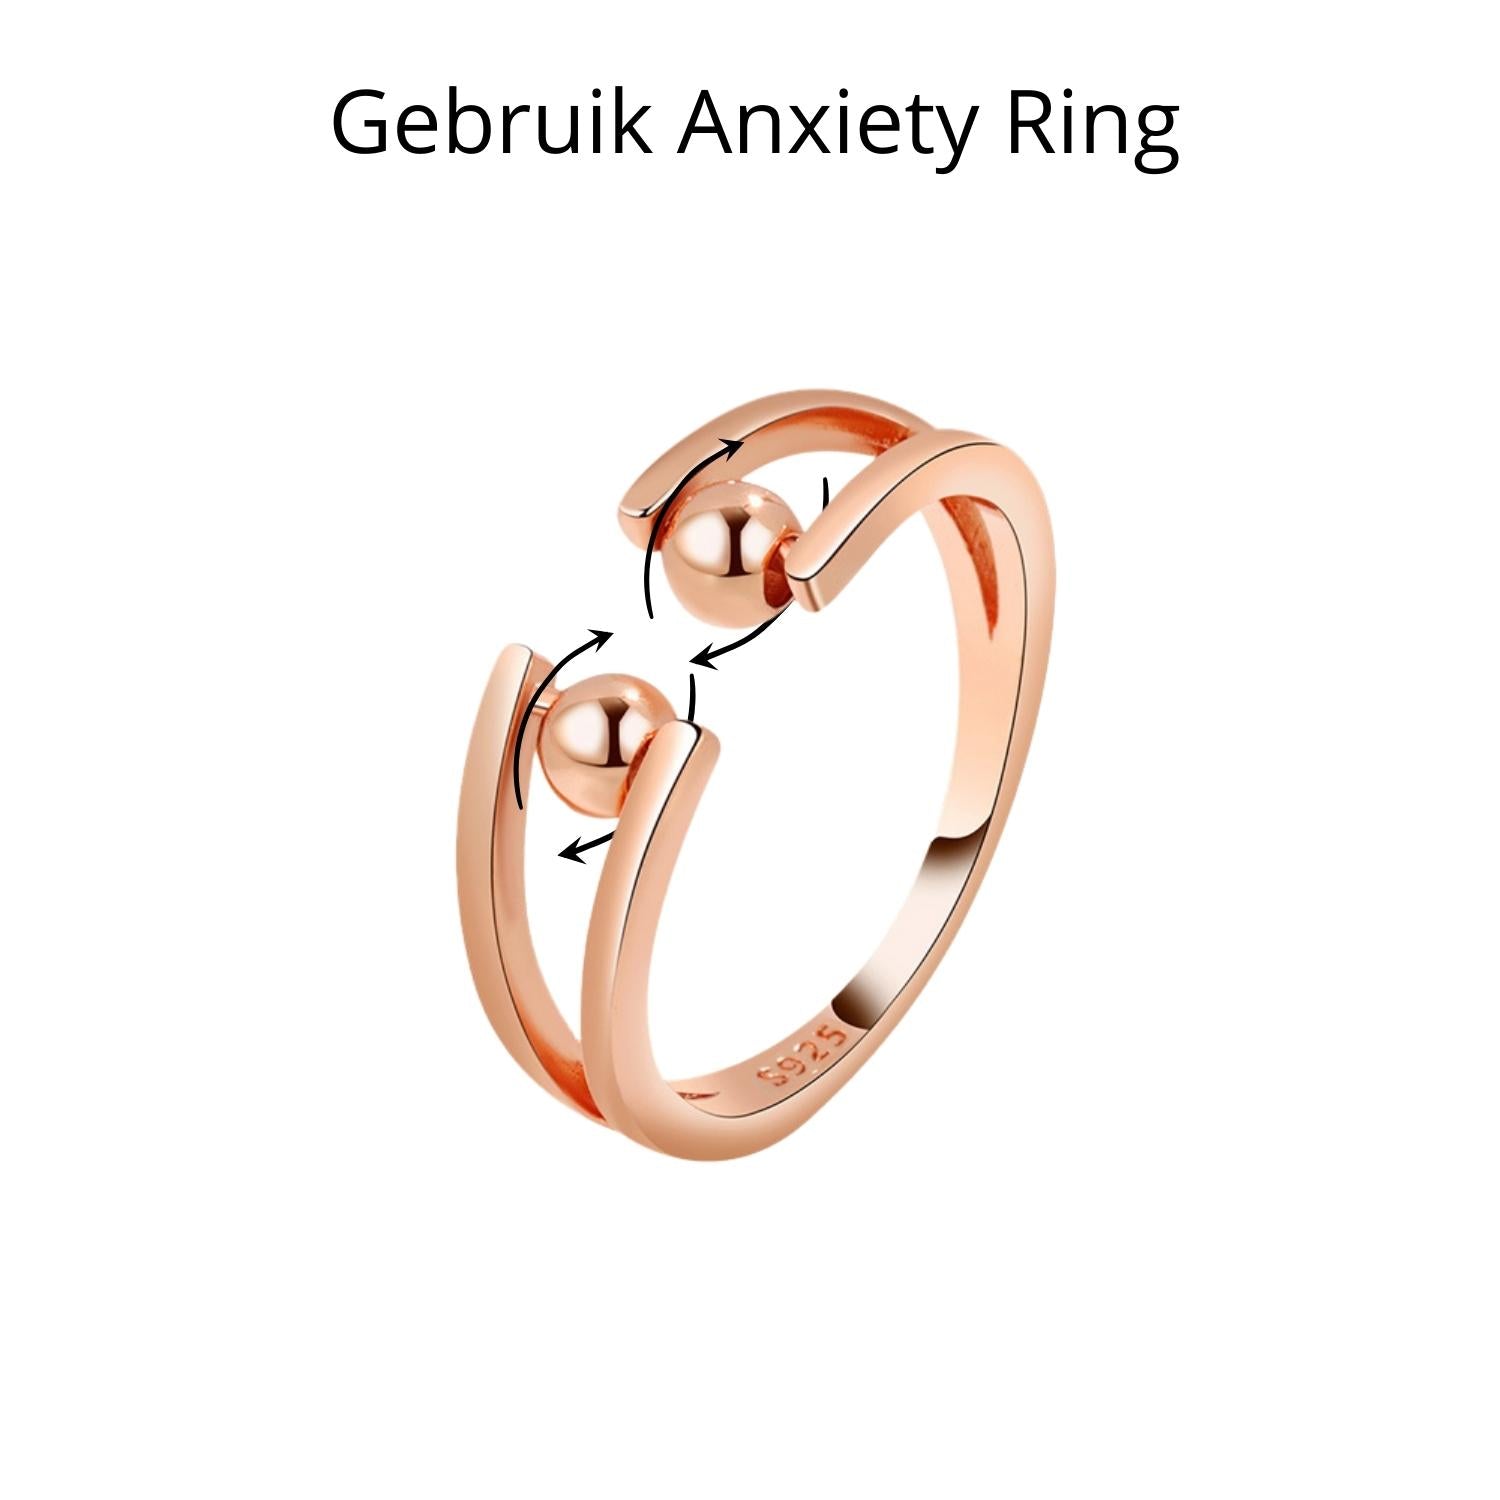 Anxiety Ring Bolletjes Zilver 925 rosé gold plated Gebruik